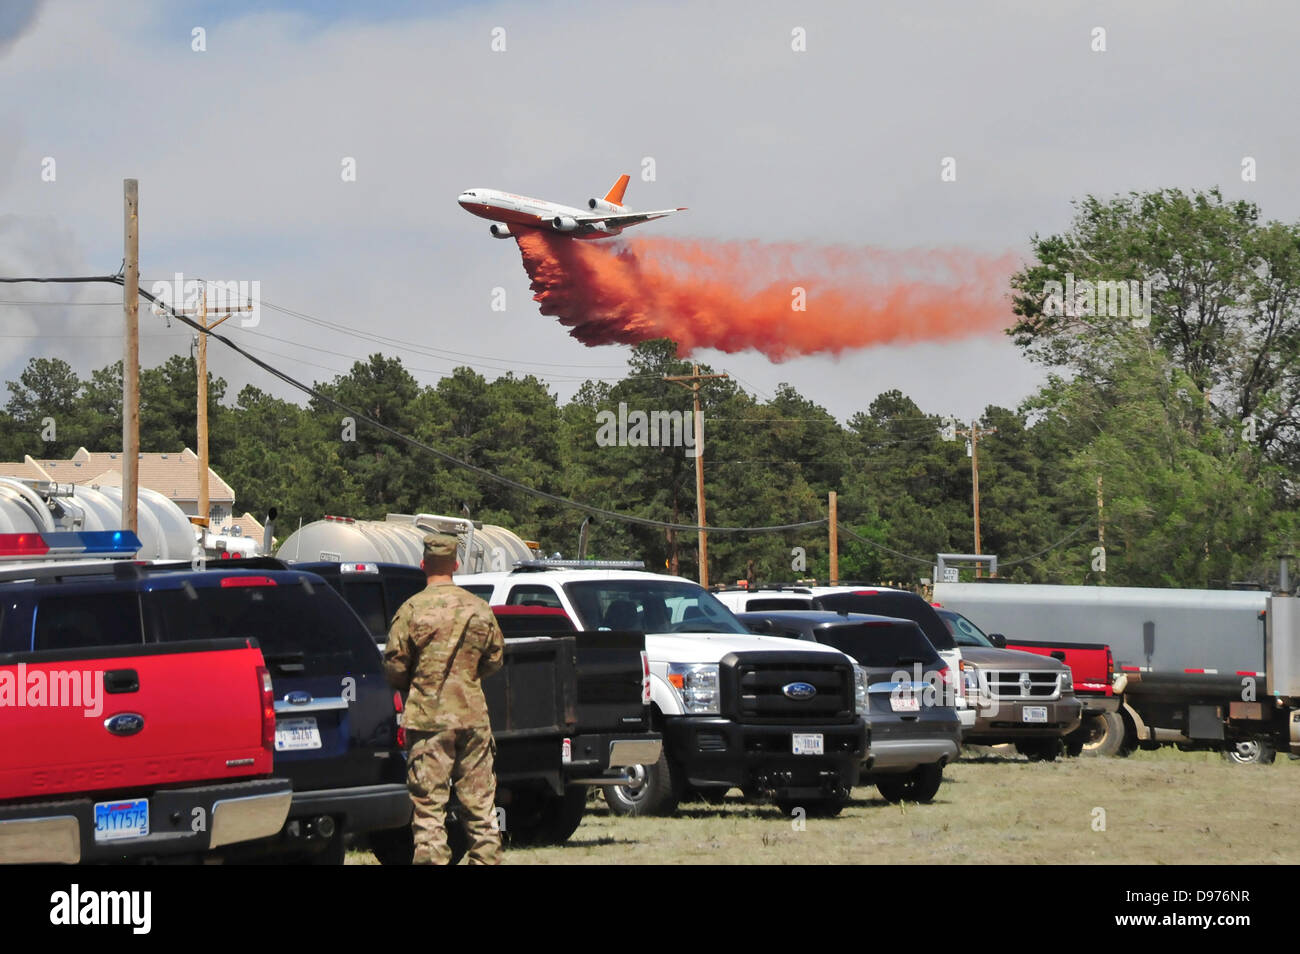 A DC-10 Air Tanker drops fire retardant to assist in fighting the Black Forest fire June 12, 2013 in El Paso County, CO. More than 100 homes have burnt in the fire south of Colorado Springs, CO. Stock Photo